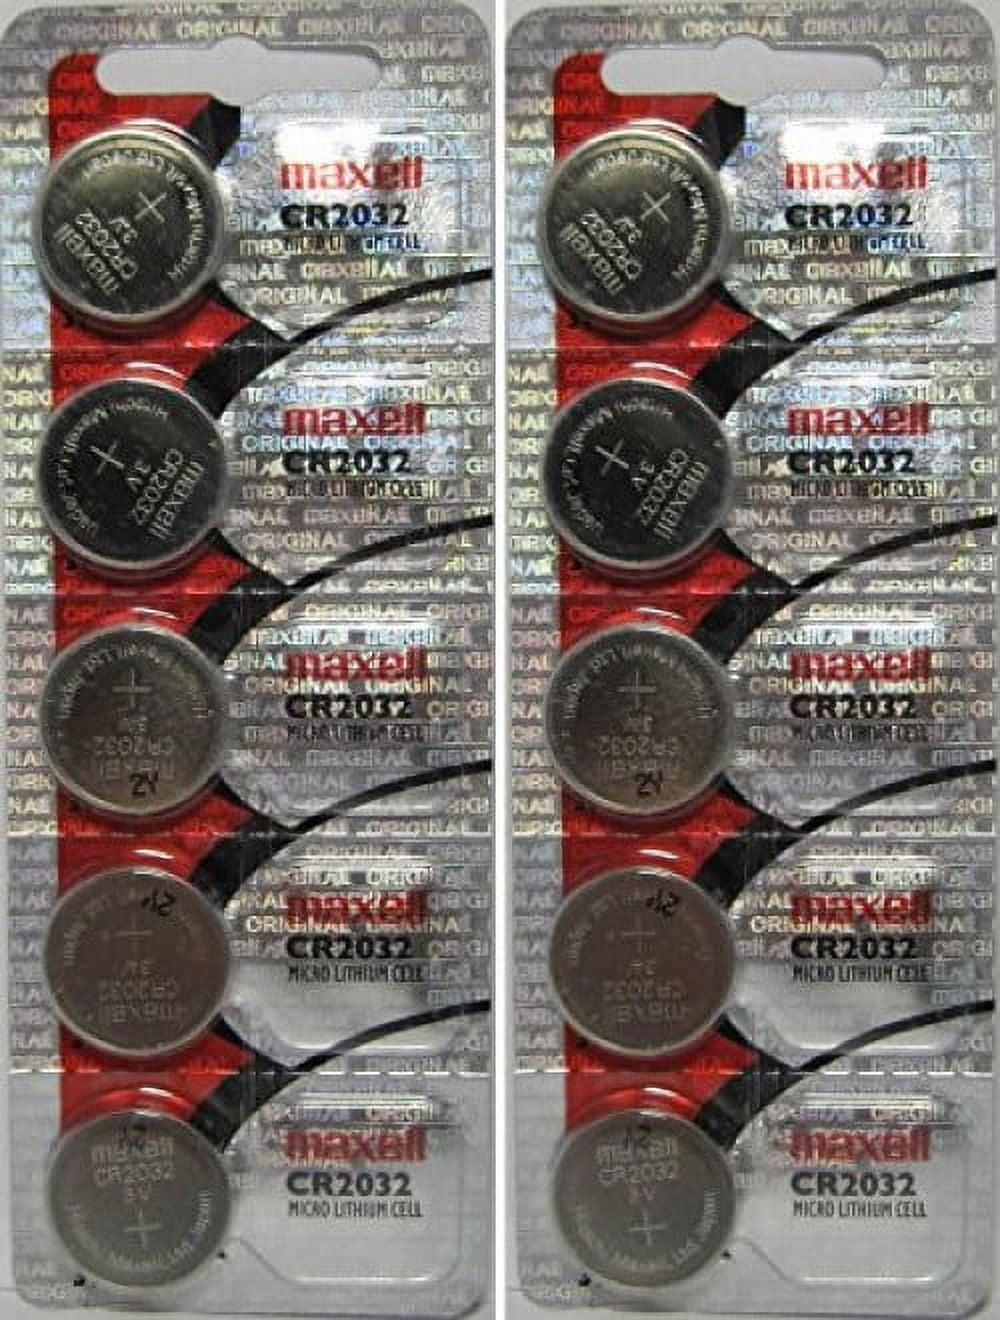 Maxell CR2032 2032 Button Coin Cell Battery - 10 PACK